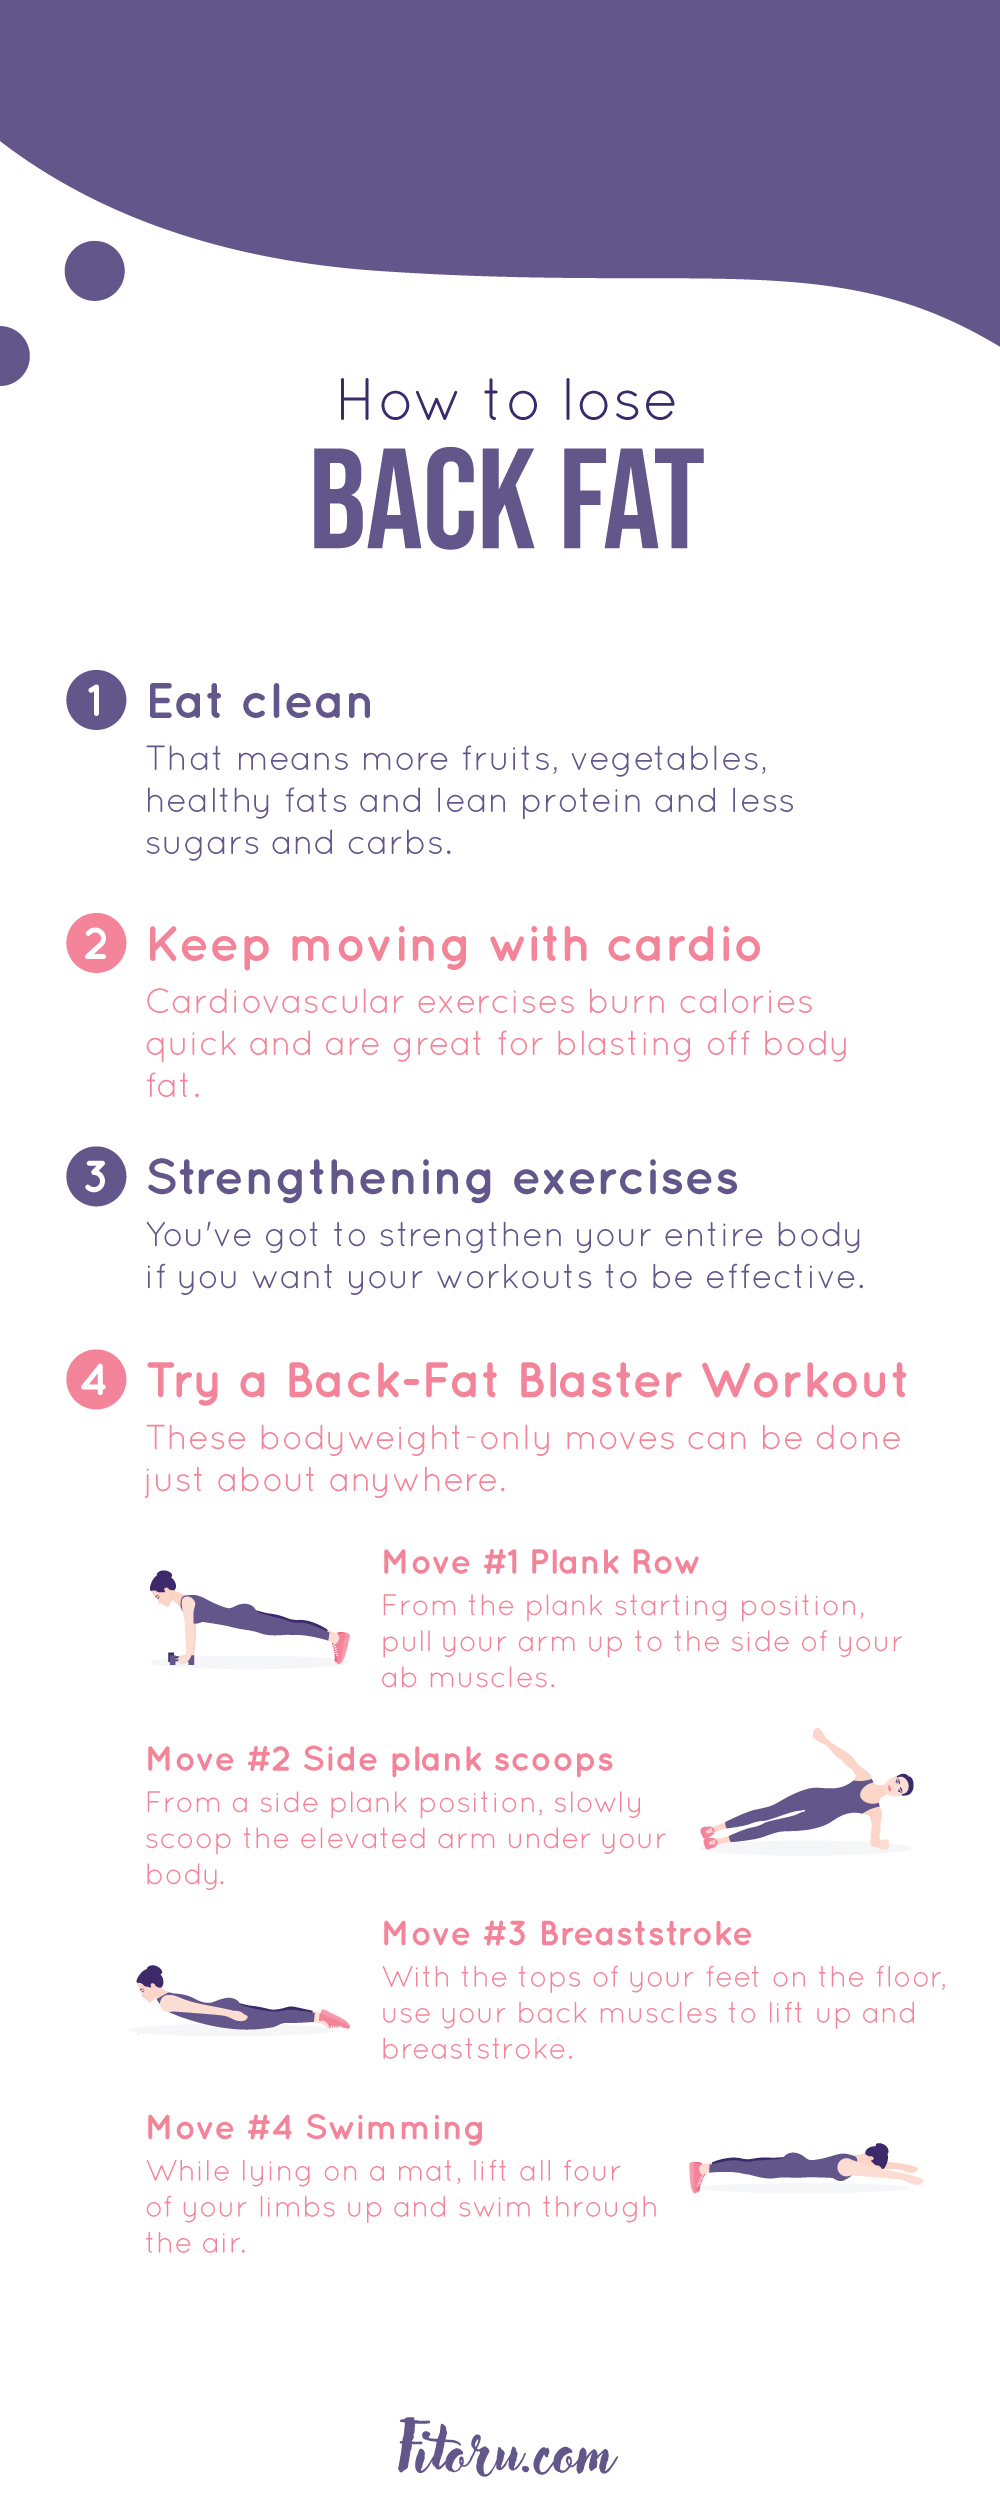 How to lose back fat.